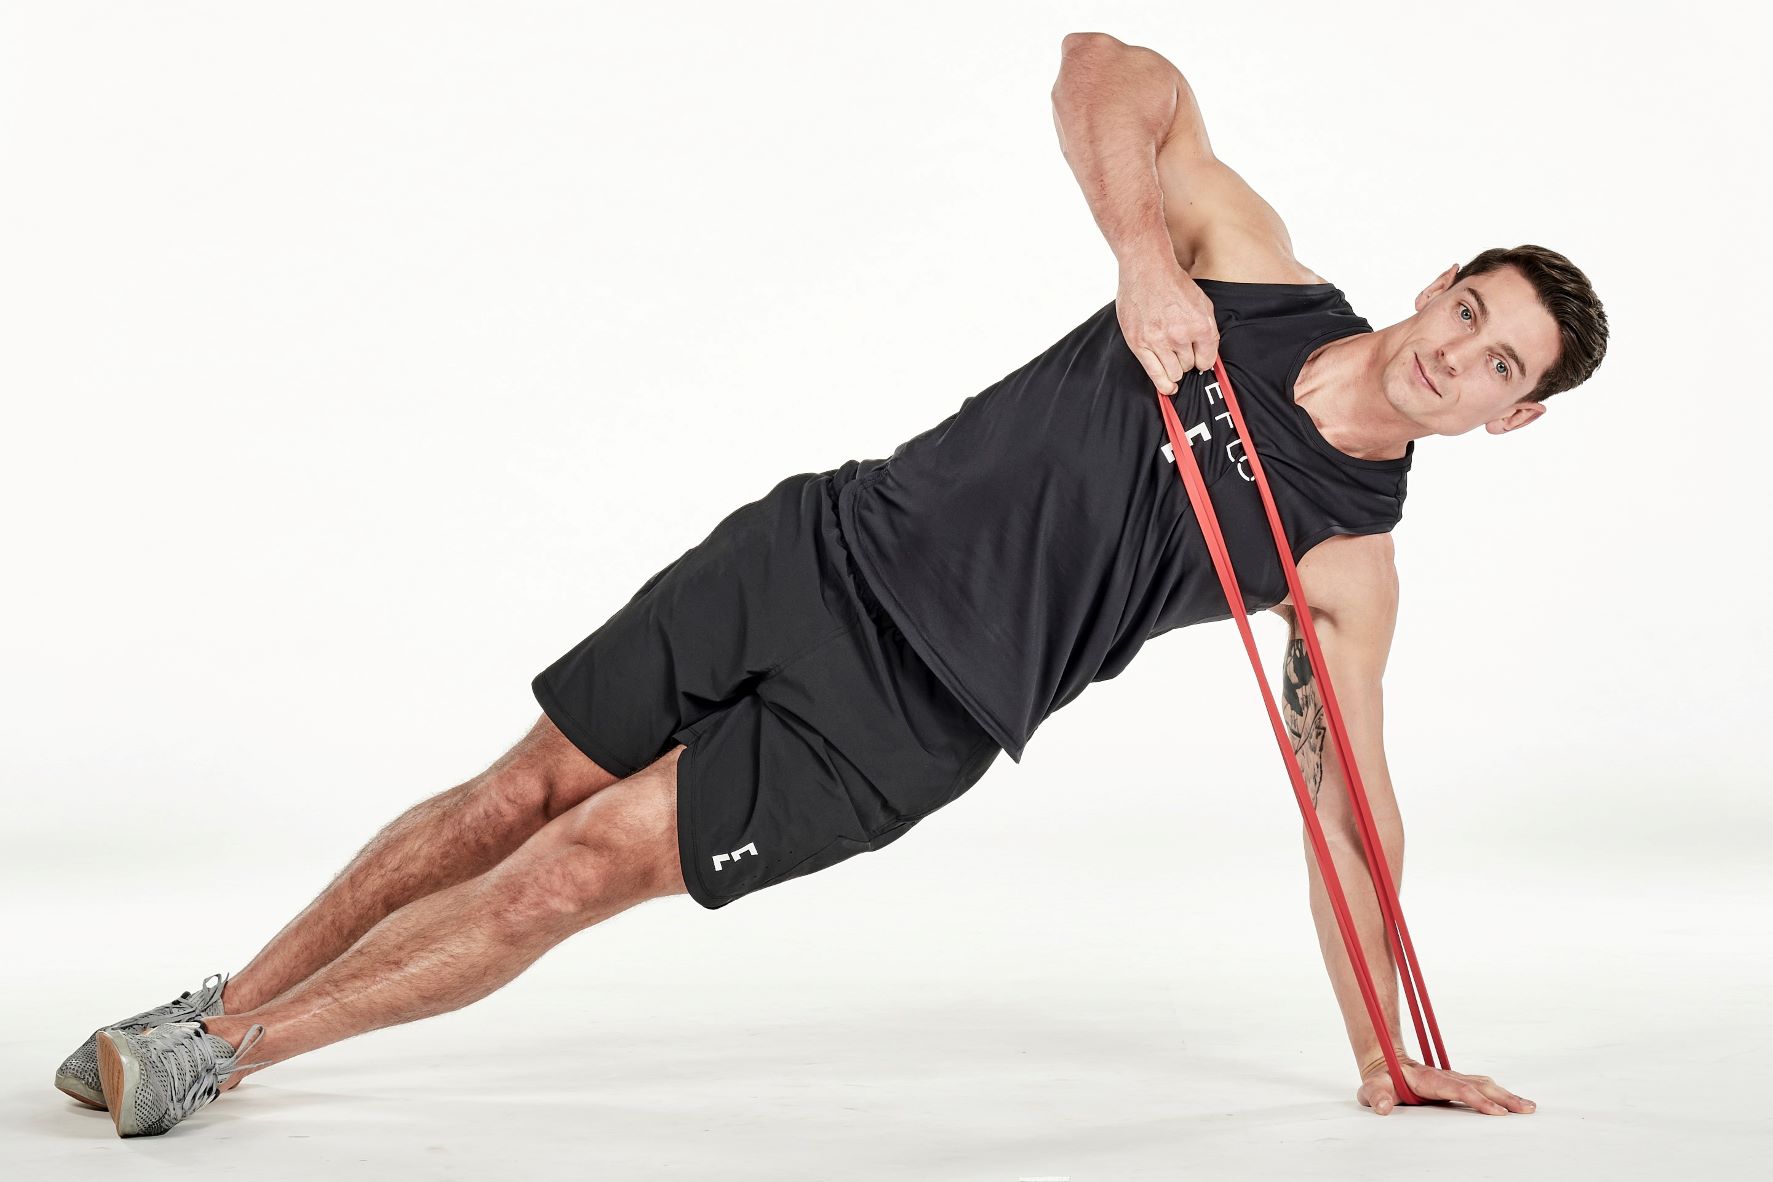 man demonstrating step two of side plank high pull; in a side plank position, his top hand holds a band that is secured under his bottom hand on the floor; his top arm is bent as he pulls the band upwards; he wears a black fitness vest, black shorts and trainers